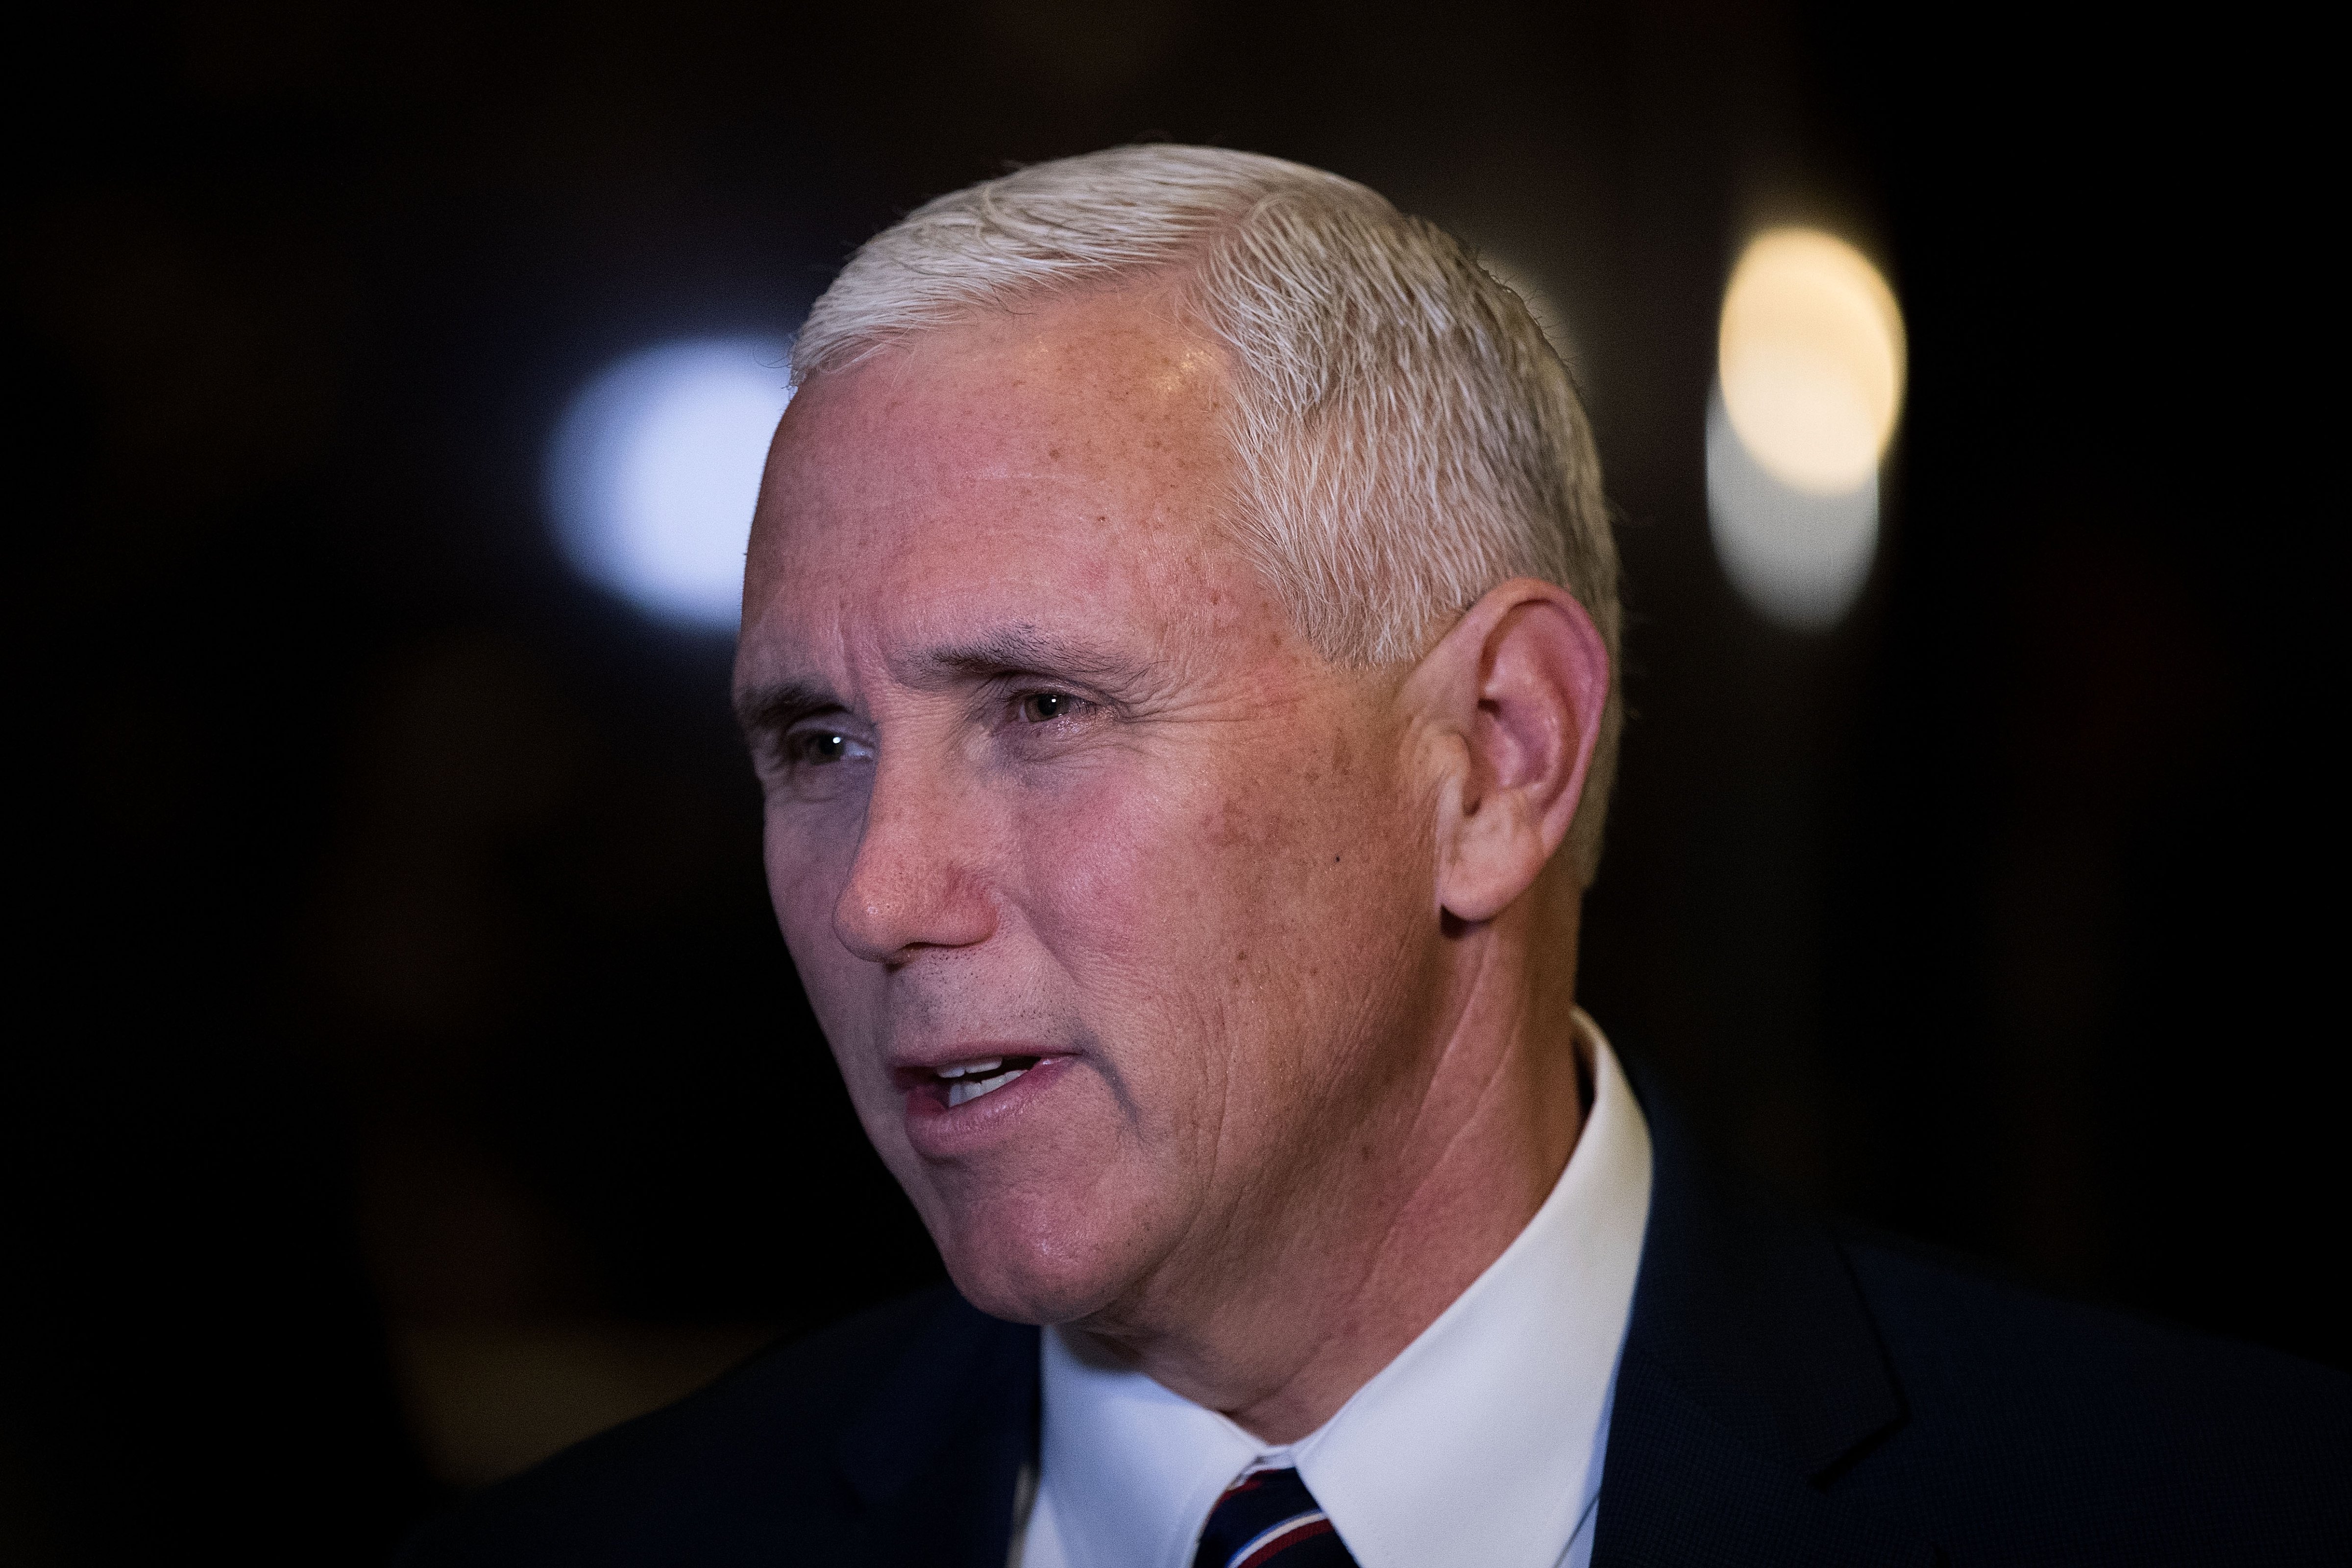 Vice President-elect Mike Pence stops and speaks briefly to reporters at Trump Tower in New York City on Nov. 18, 2016. (Drew Angerer—Getty Images)